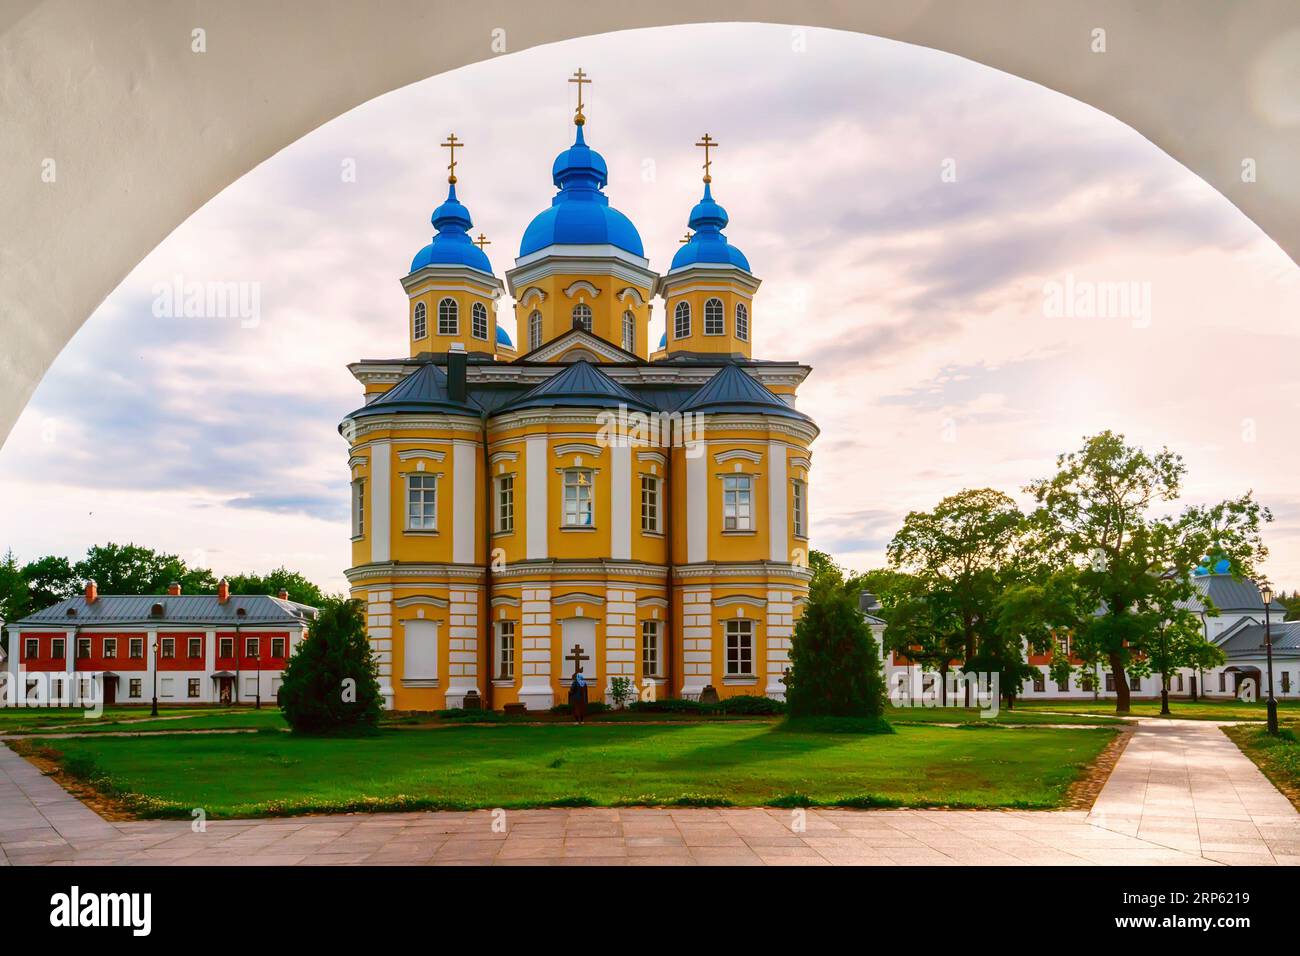 Cathedral in the name of the Nativity of the Blessed Virgin Mary Konevsky monastery on the island of Konevets on Lake Ladoga - Russia. Bell tower abov Stock Photo